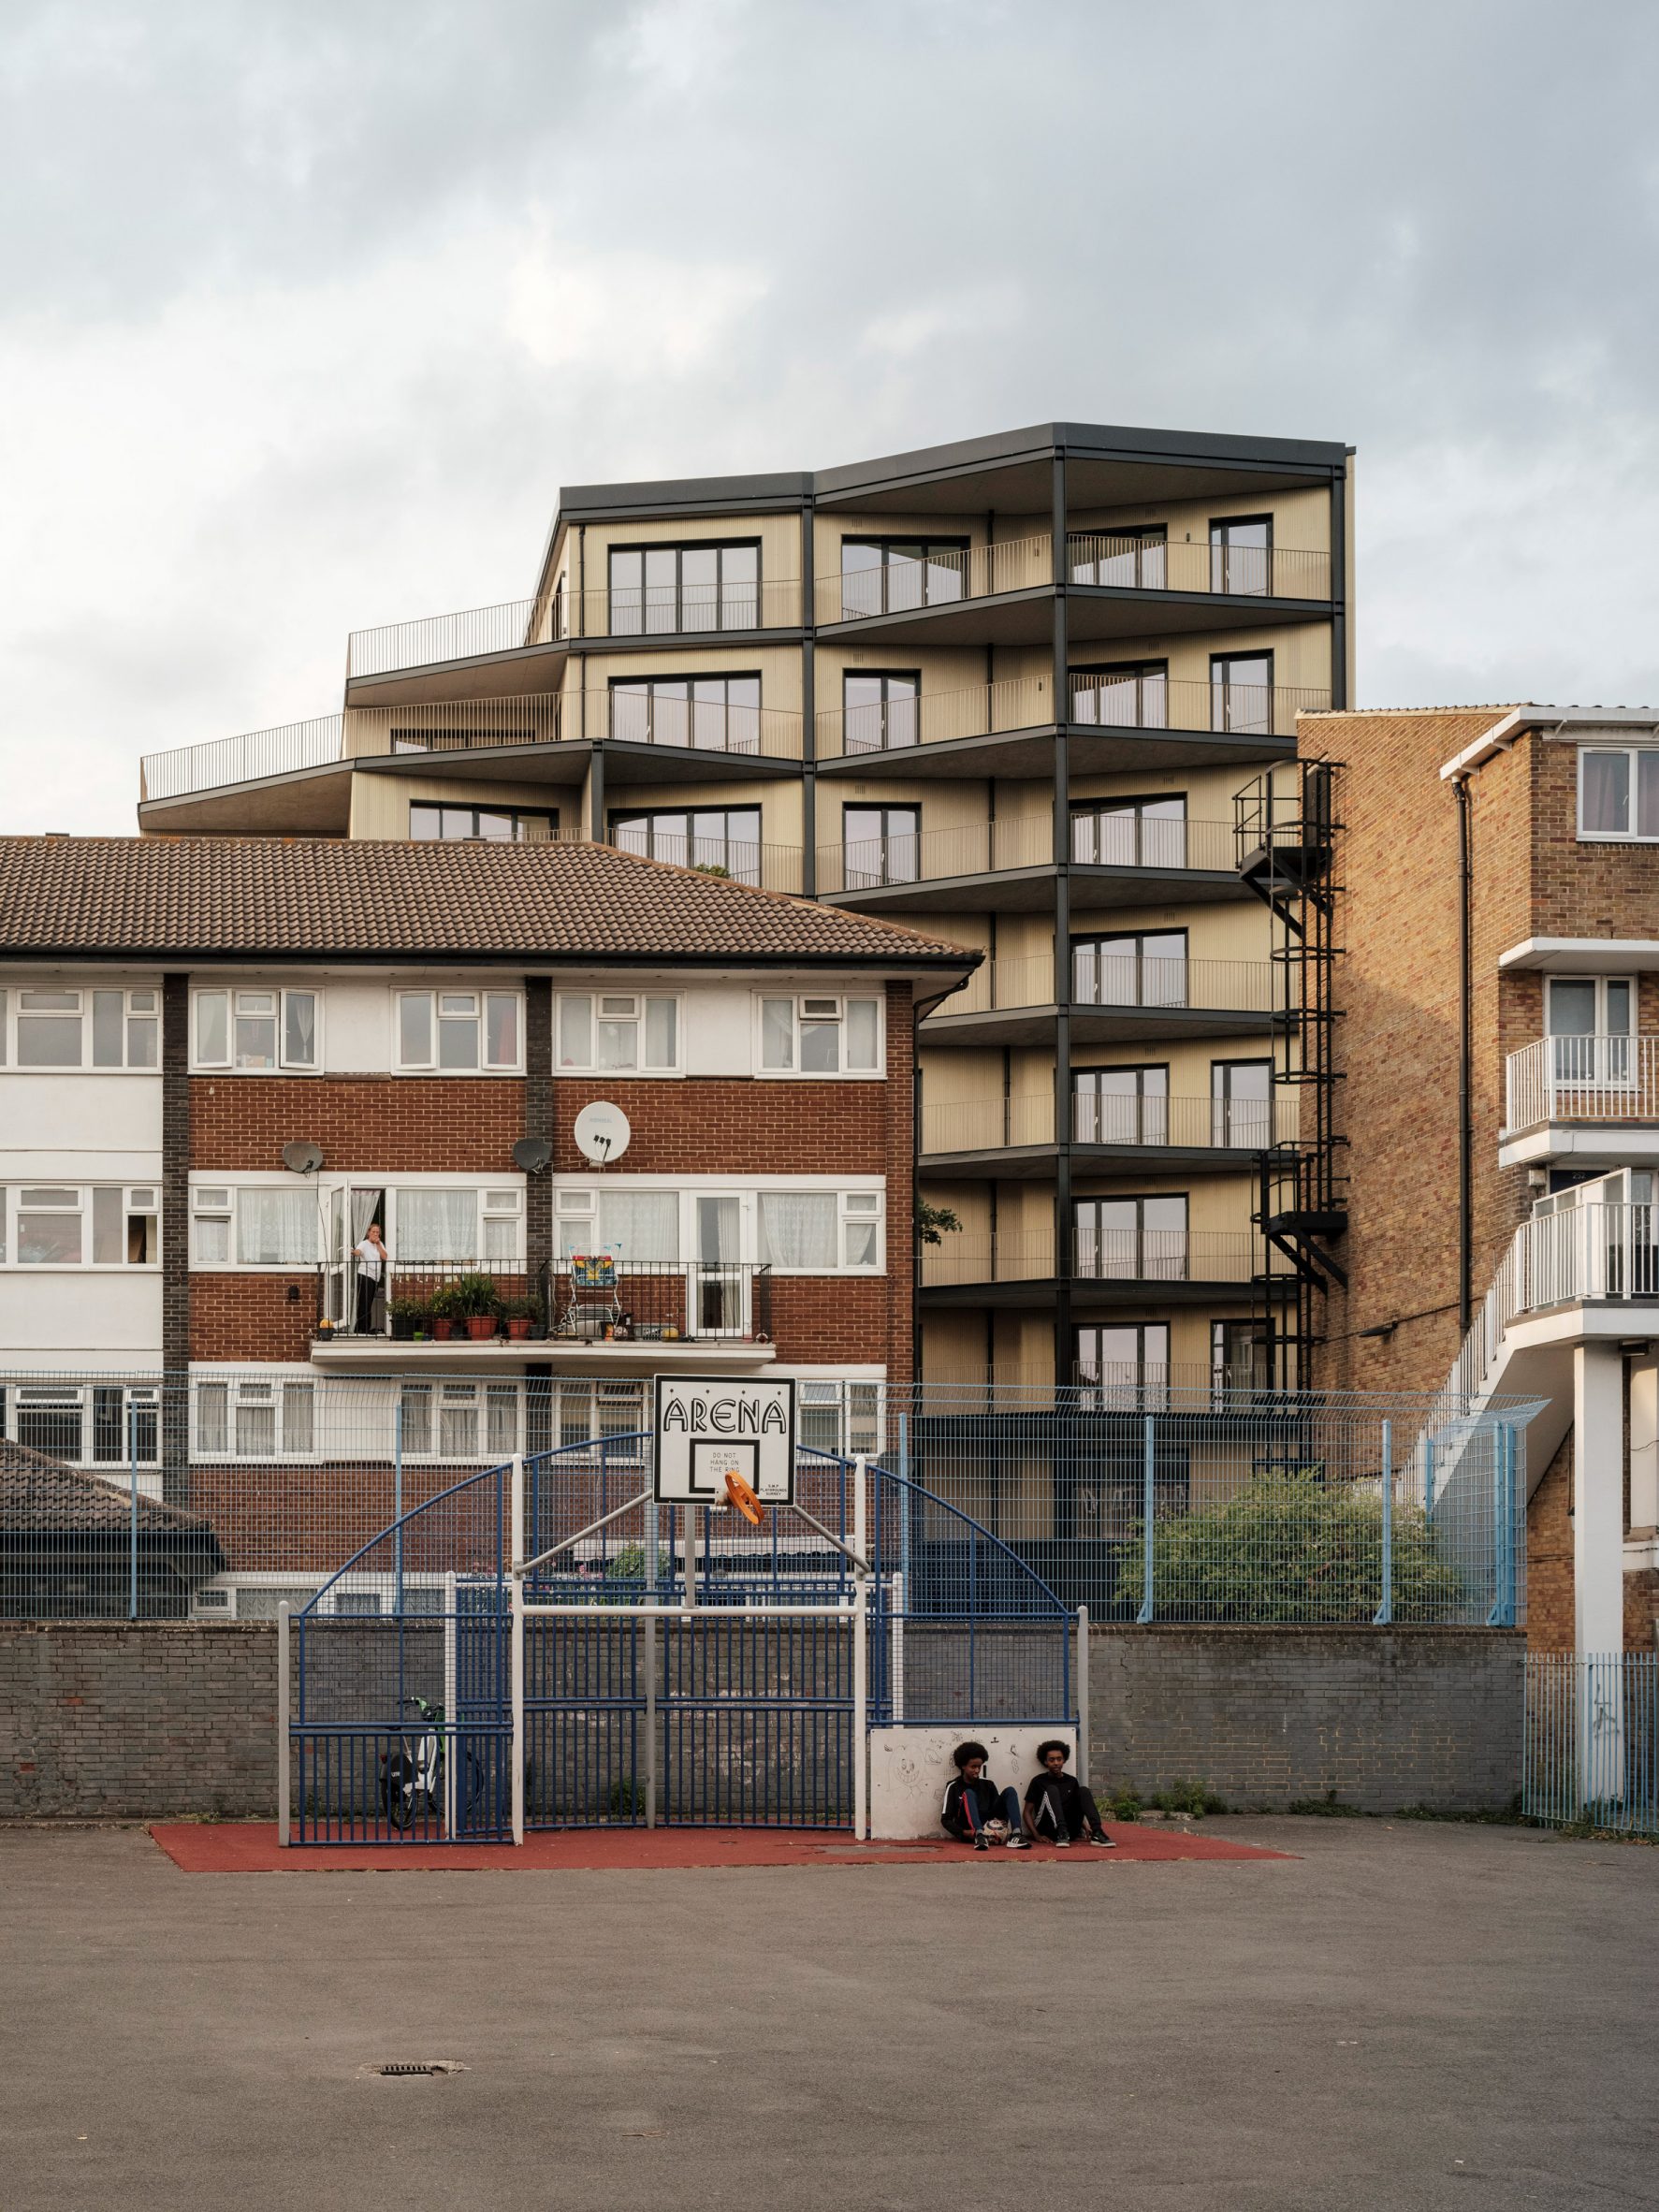 Layers of housing in London